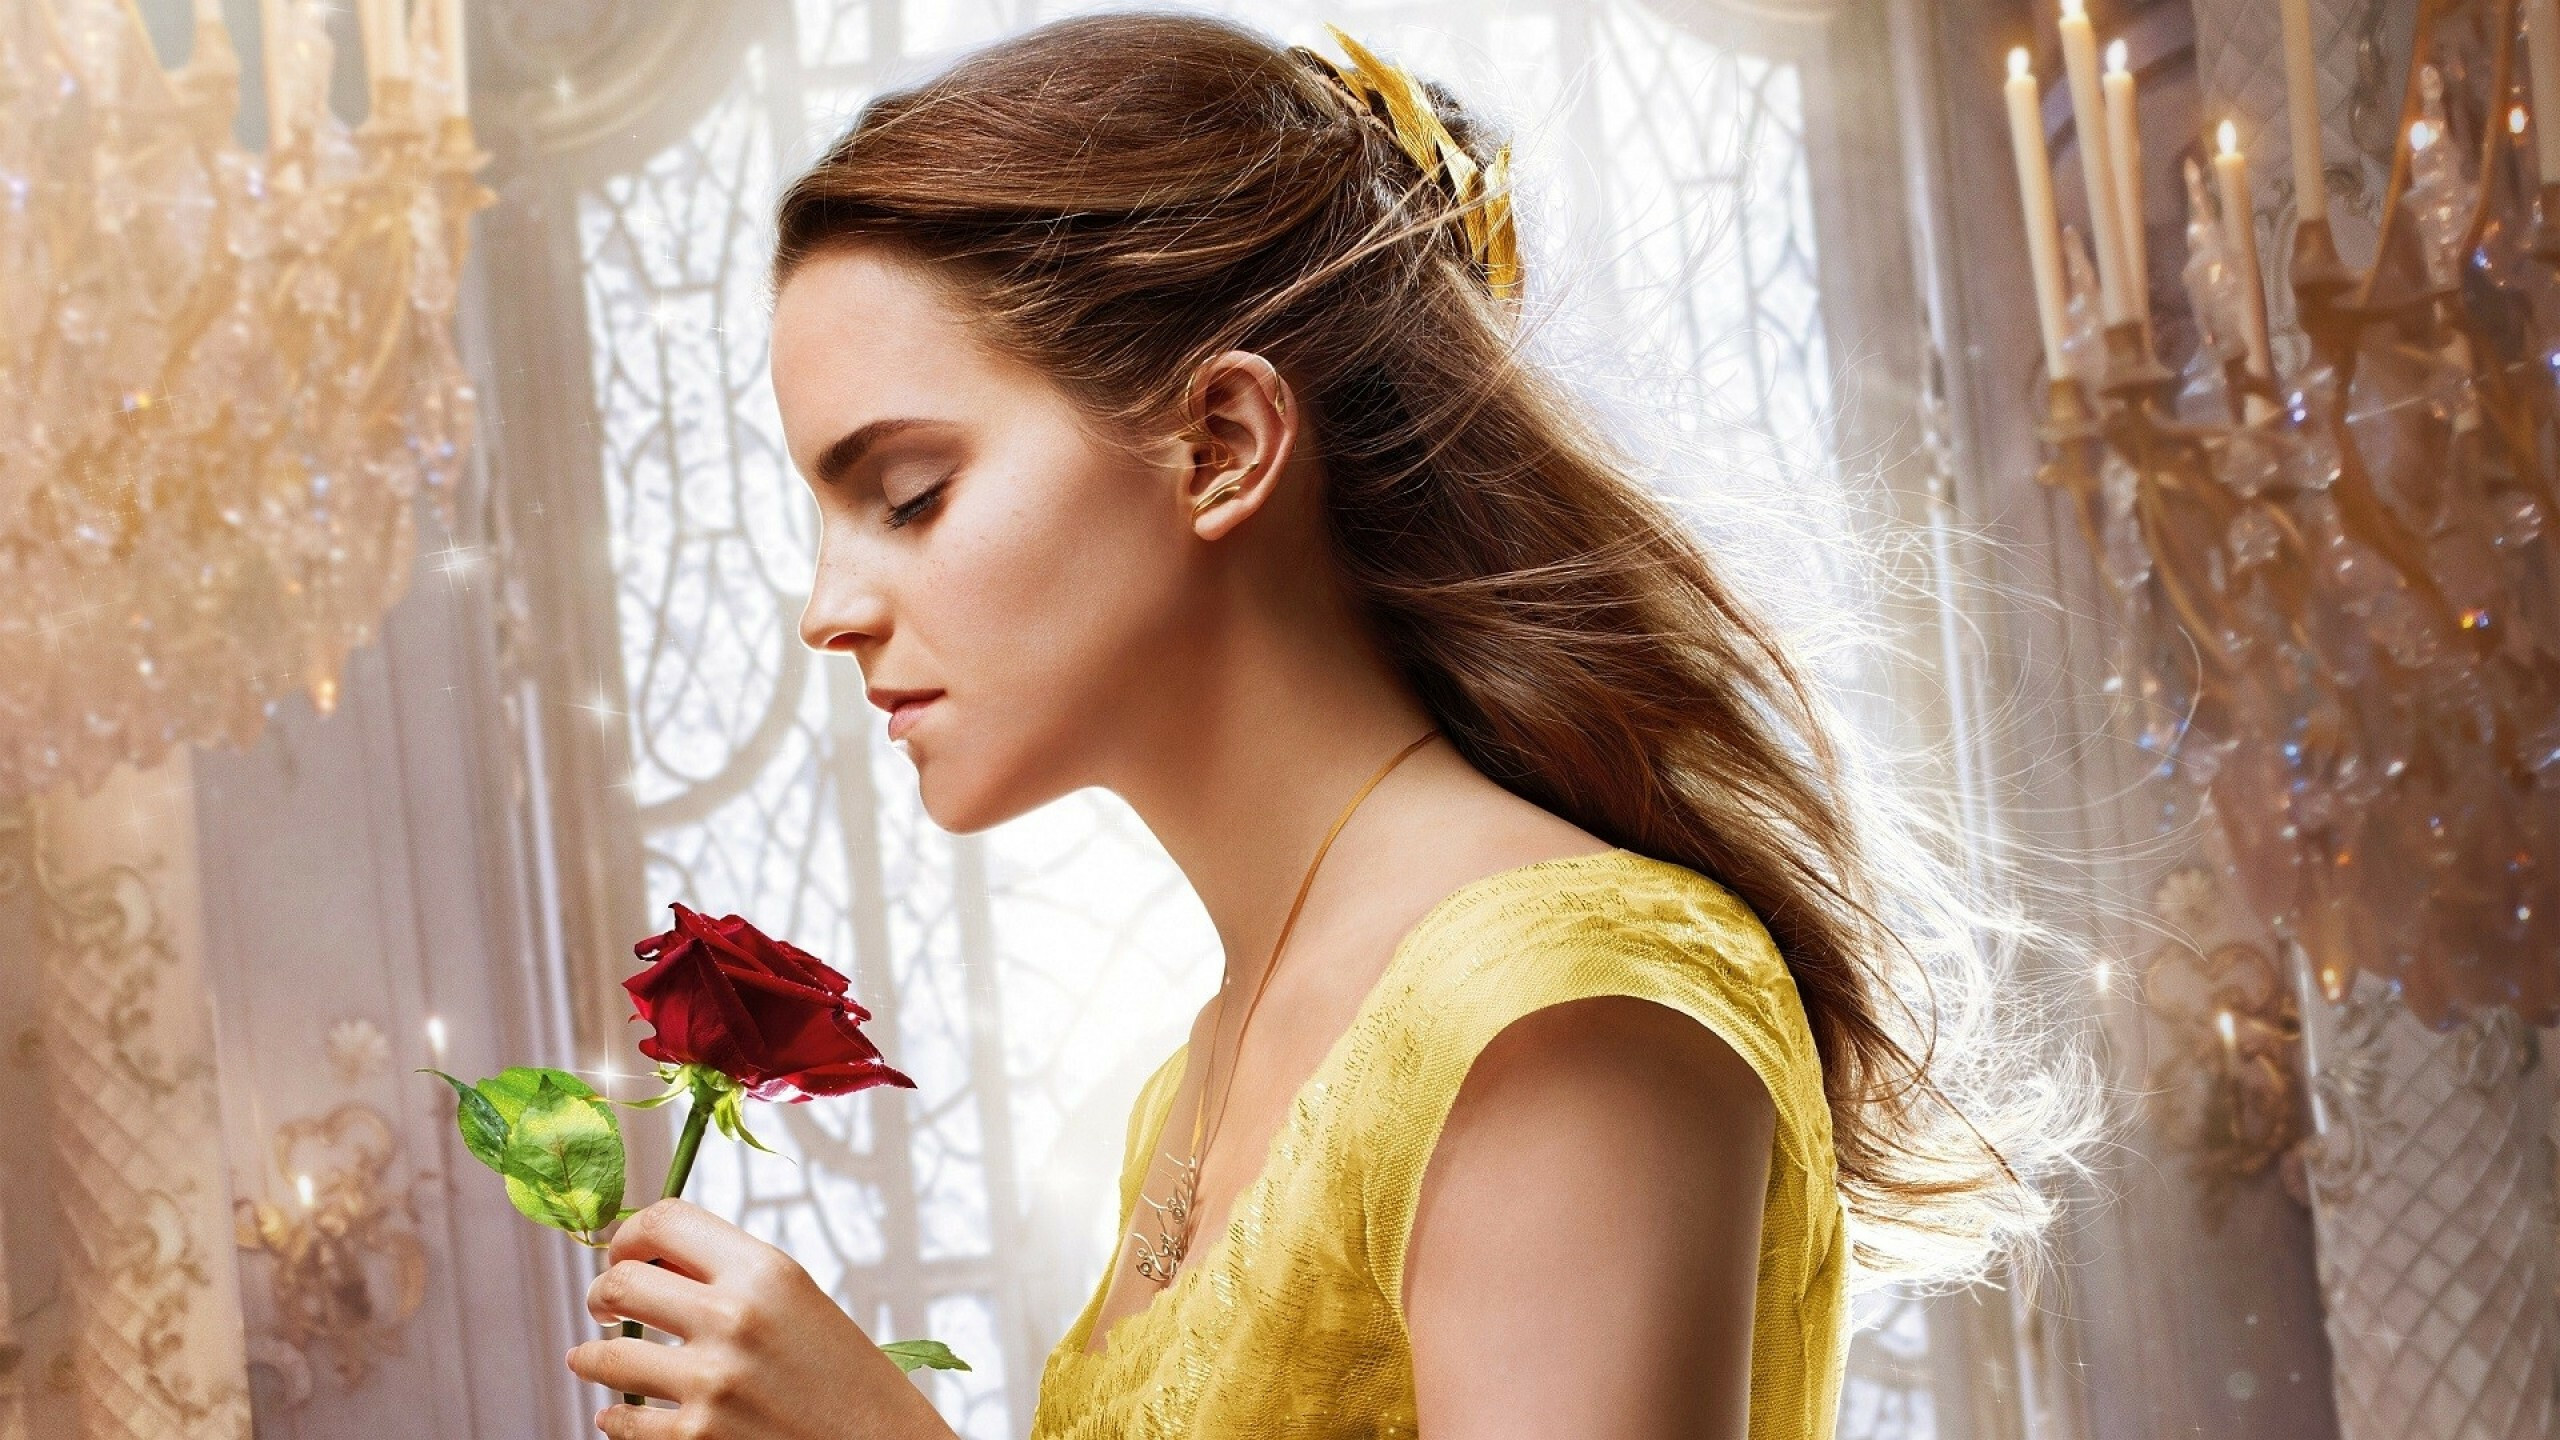 Beauty and the Beast: Emma Watson as Belle, The book-loving daughter of an eccentric inventor. 2560x1440 HD Background.